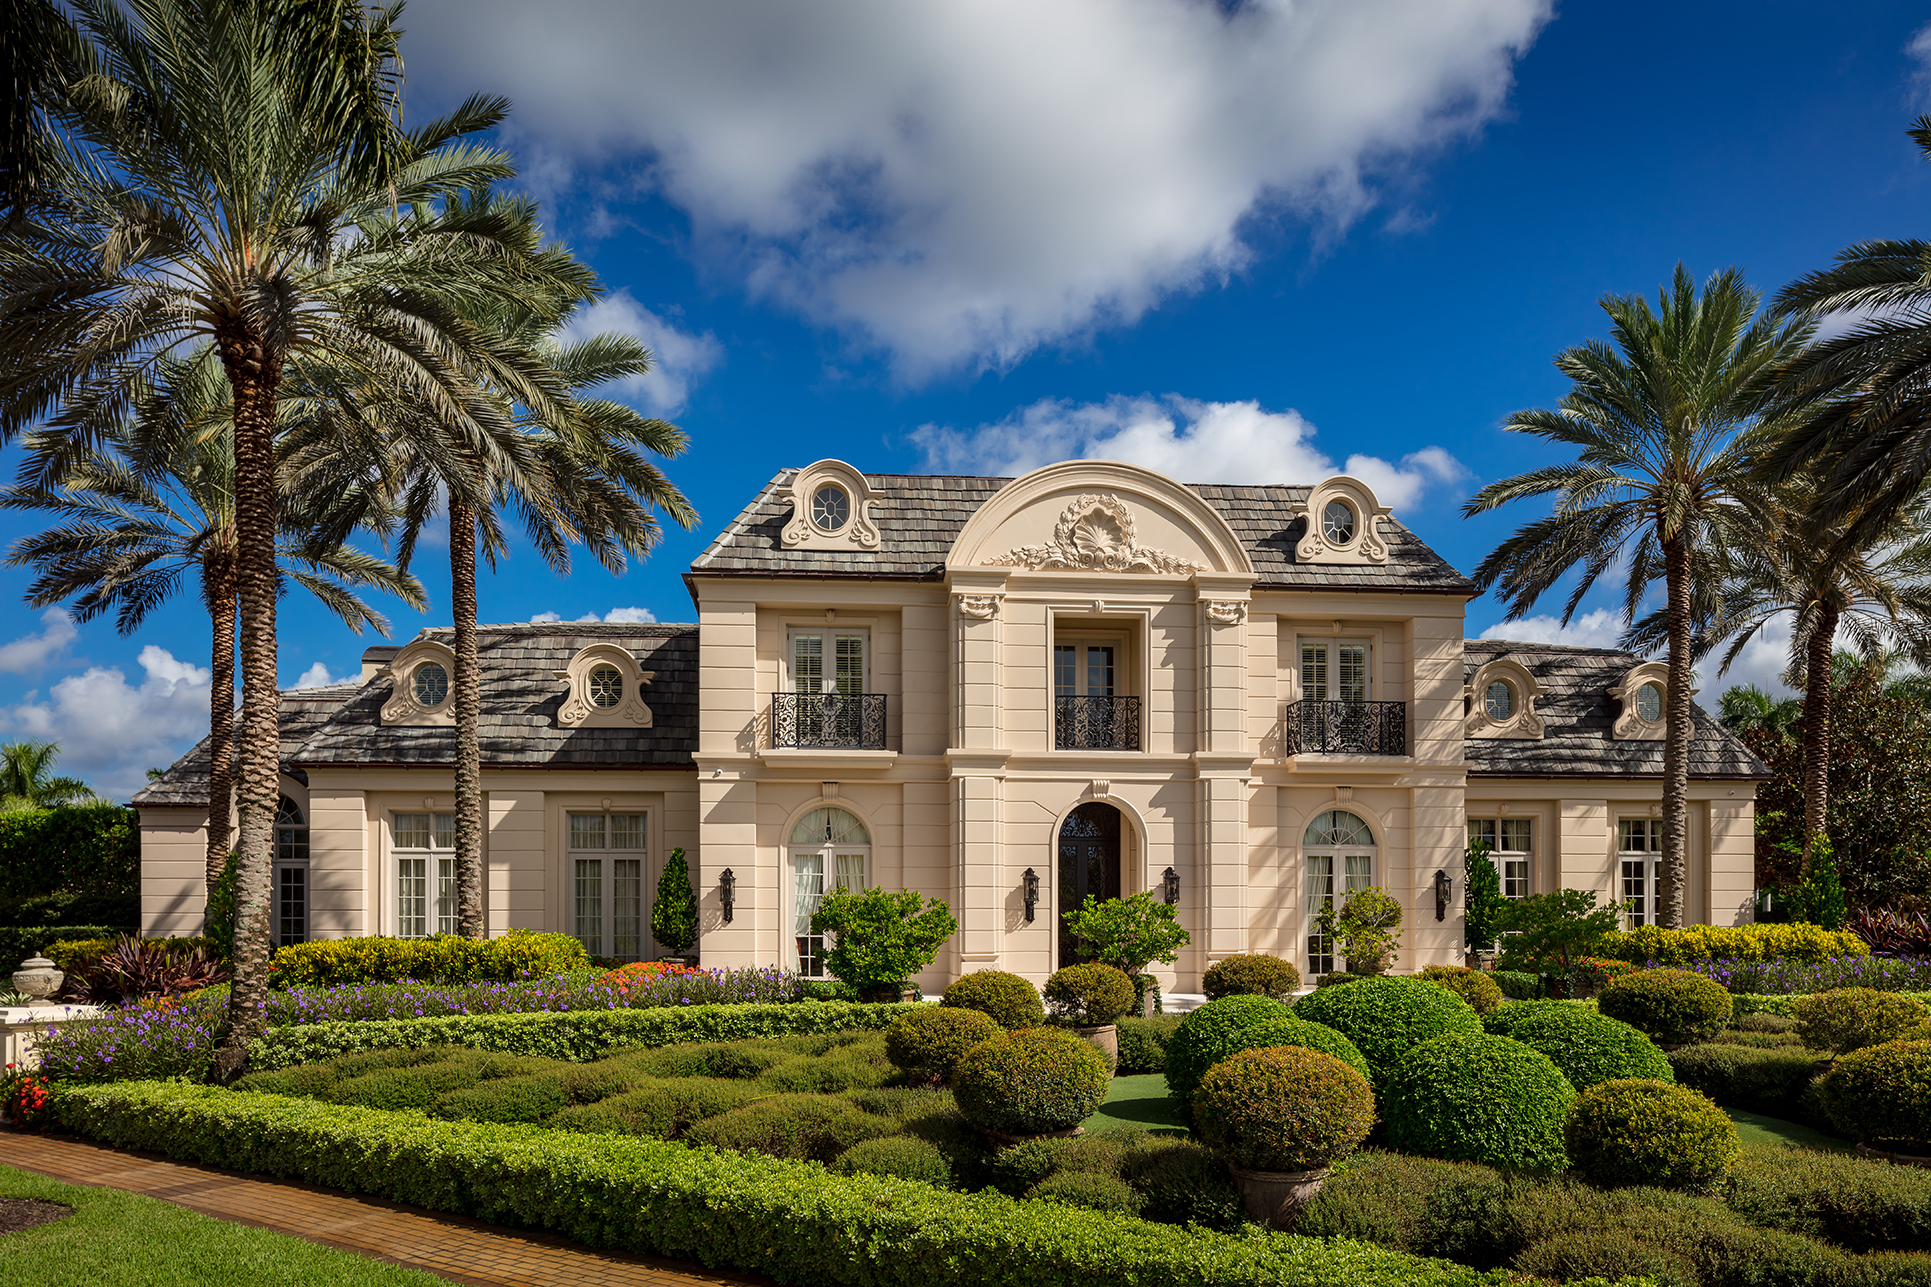 Walsh is equally fluent in modern modes and traditional homes, as at the St Andrews Country Club in Boca Raton.